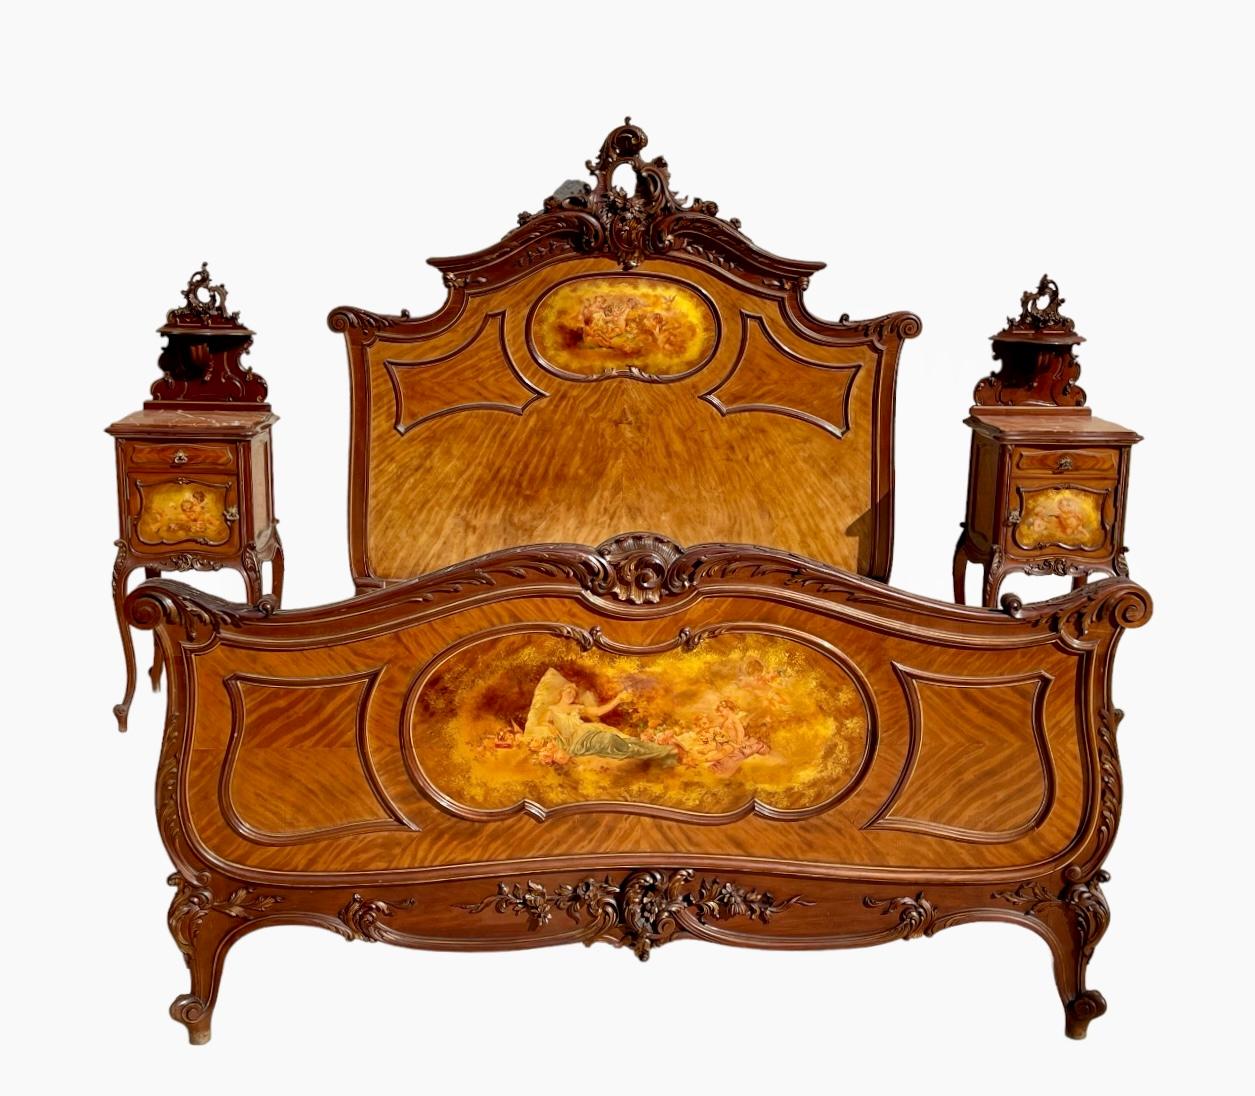 Magnificent Louis XV style mahogany bed circa 1870/1880 and its two bedside tables. Richly carved with shells, scrolls, acanthus leaves and rockeries. In the 2 panels of the bed, you can admire a love scene in Martin varnish. We find the same thing